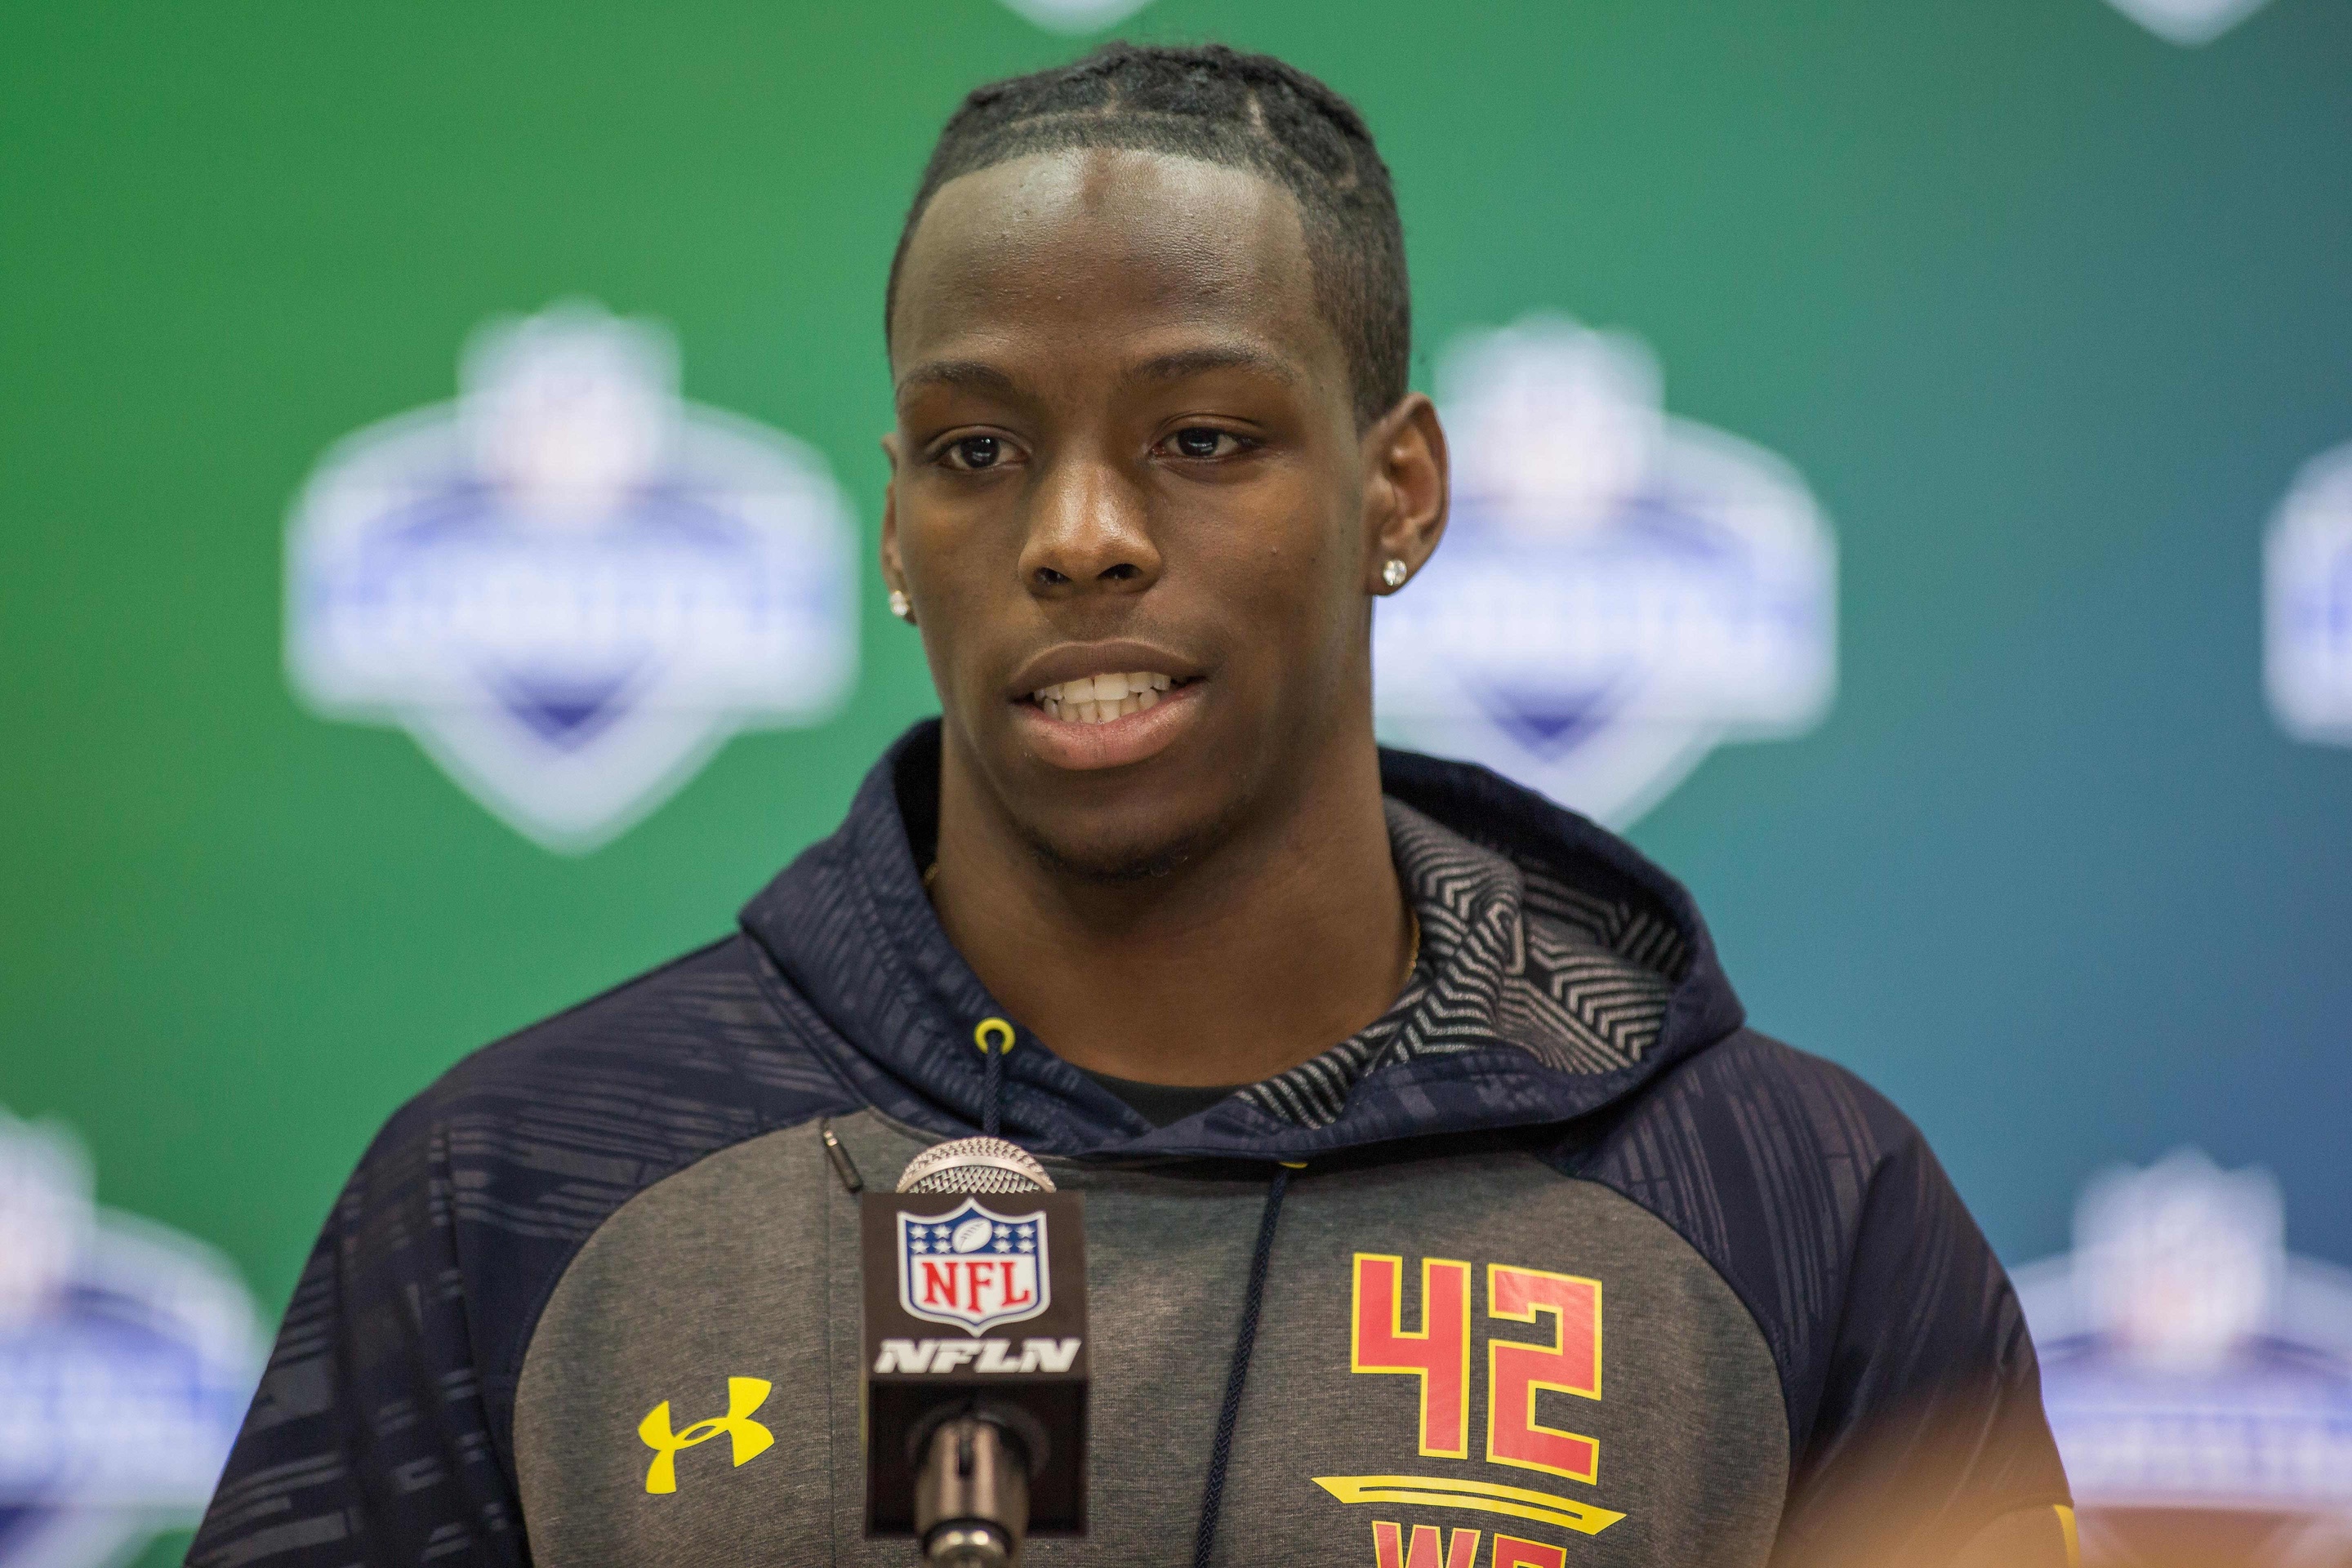 Mar 3, 2017; Indianapolis, IN, USA; Washington wide receiver John Ross speaks to the media during the 2017 combine at Indiana Convention Center. Mandatory Credit: Trevor Ruszkowski-USA TODAY Sports